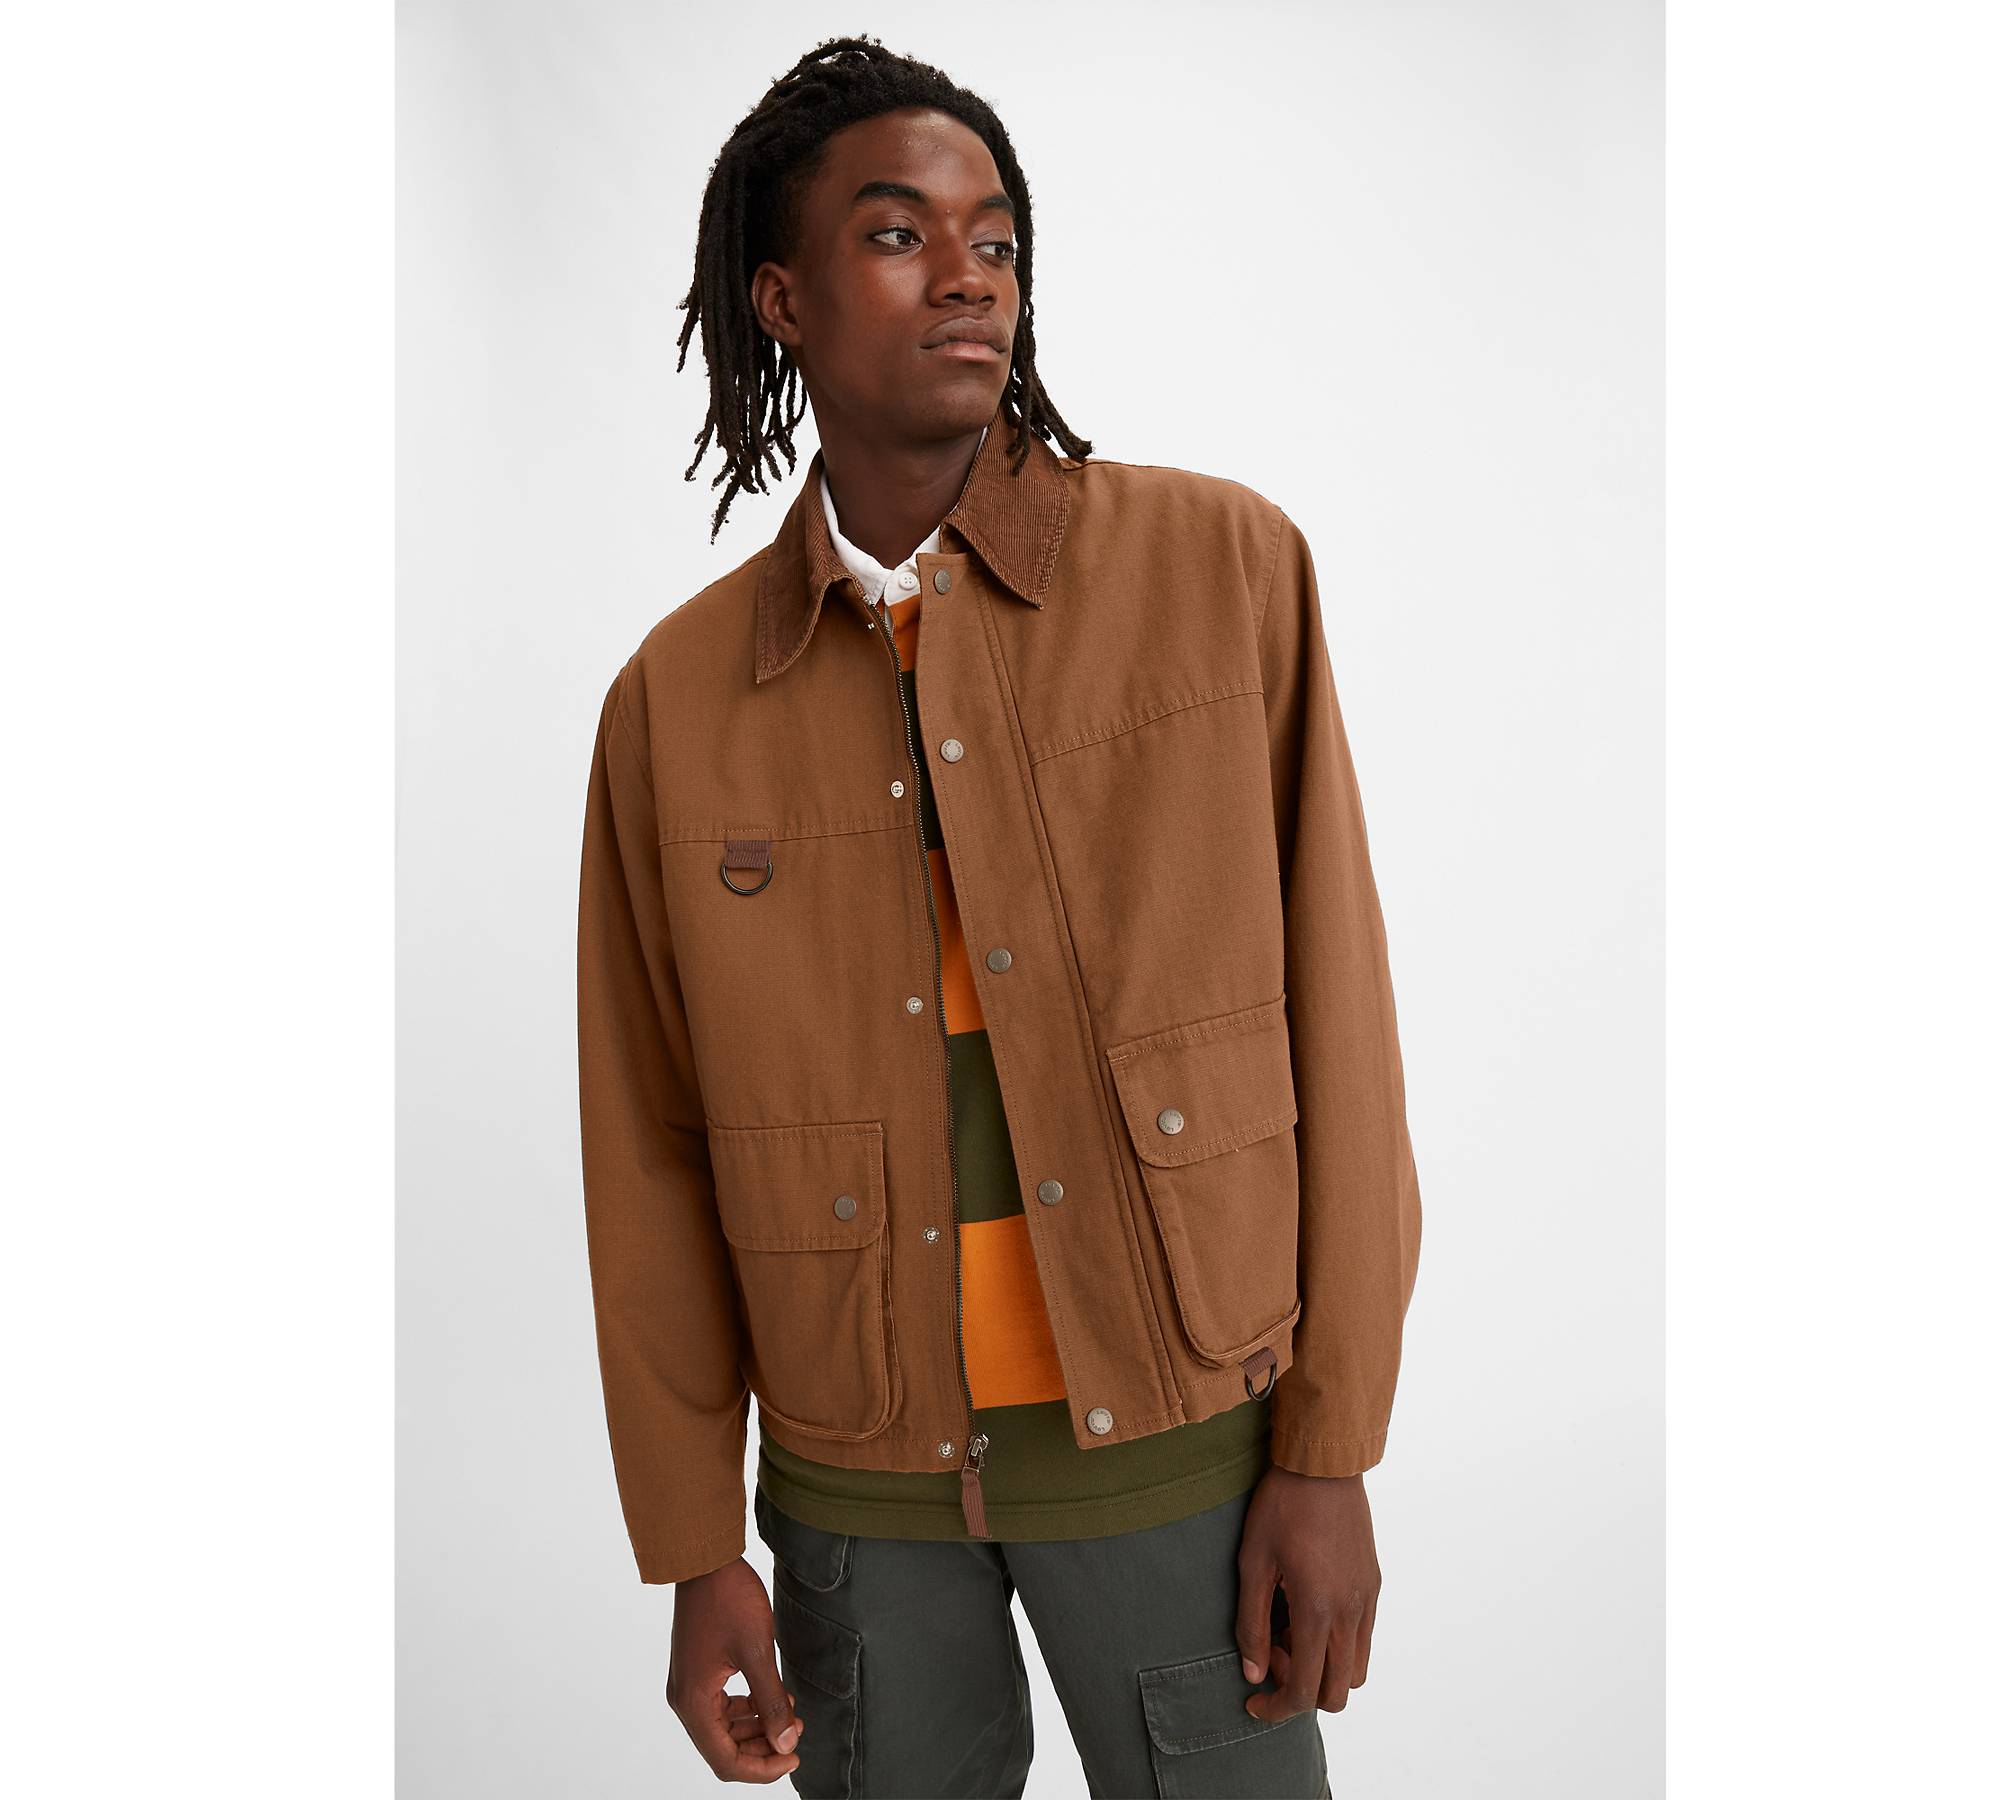 The Fishing Jacket - Brown